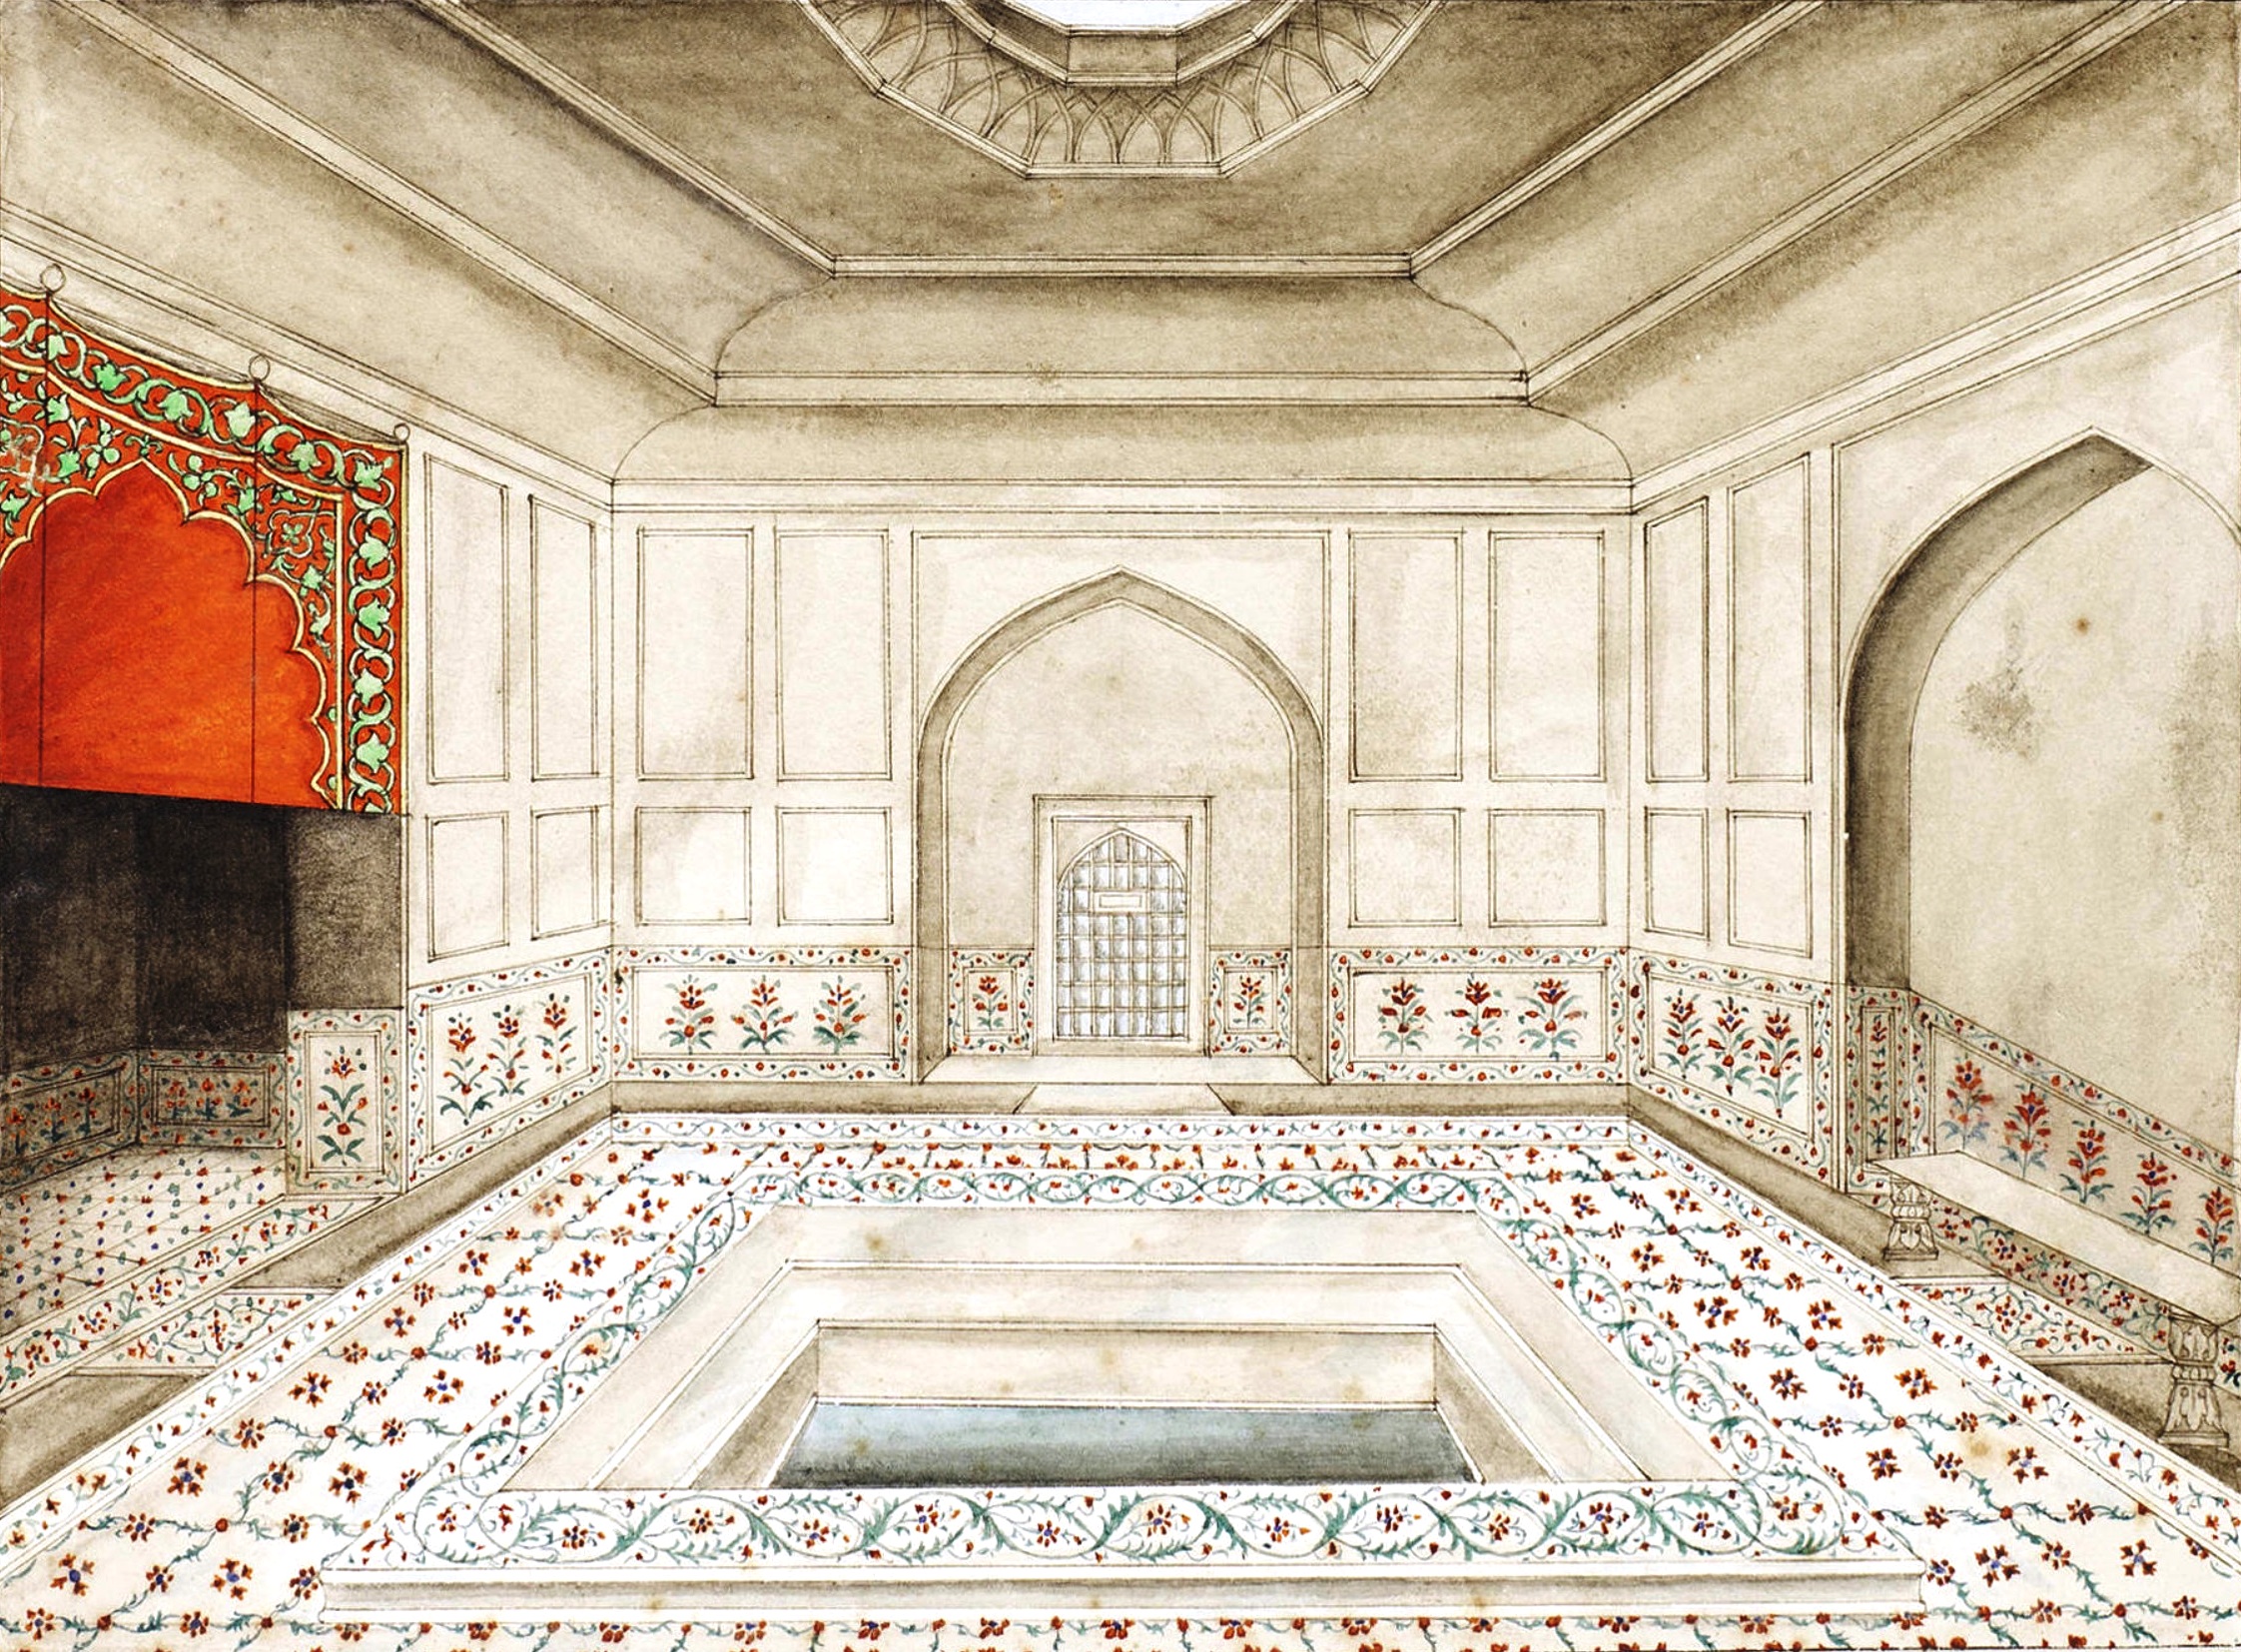  The hammam, or baths, of the Red Fort 